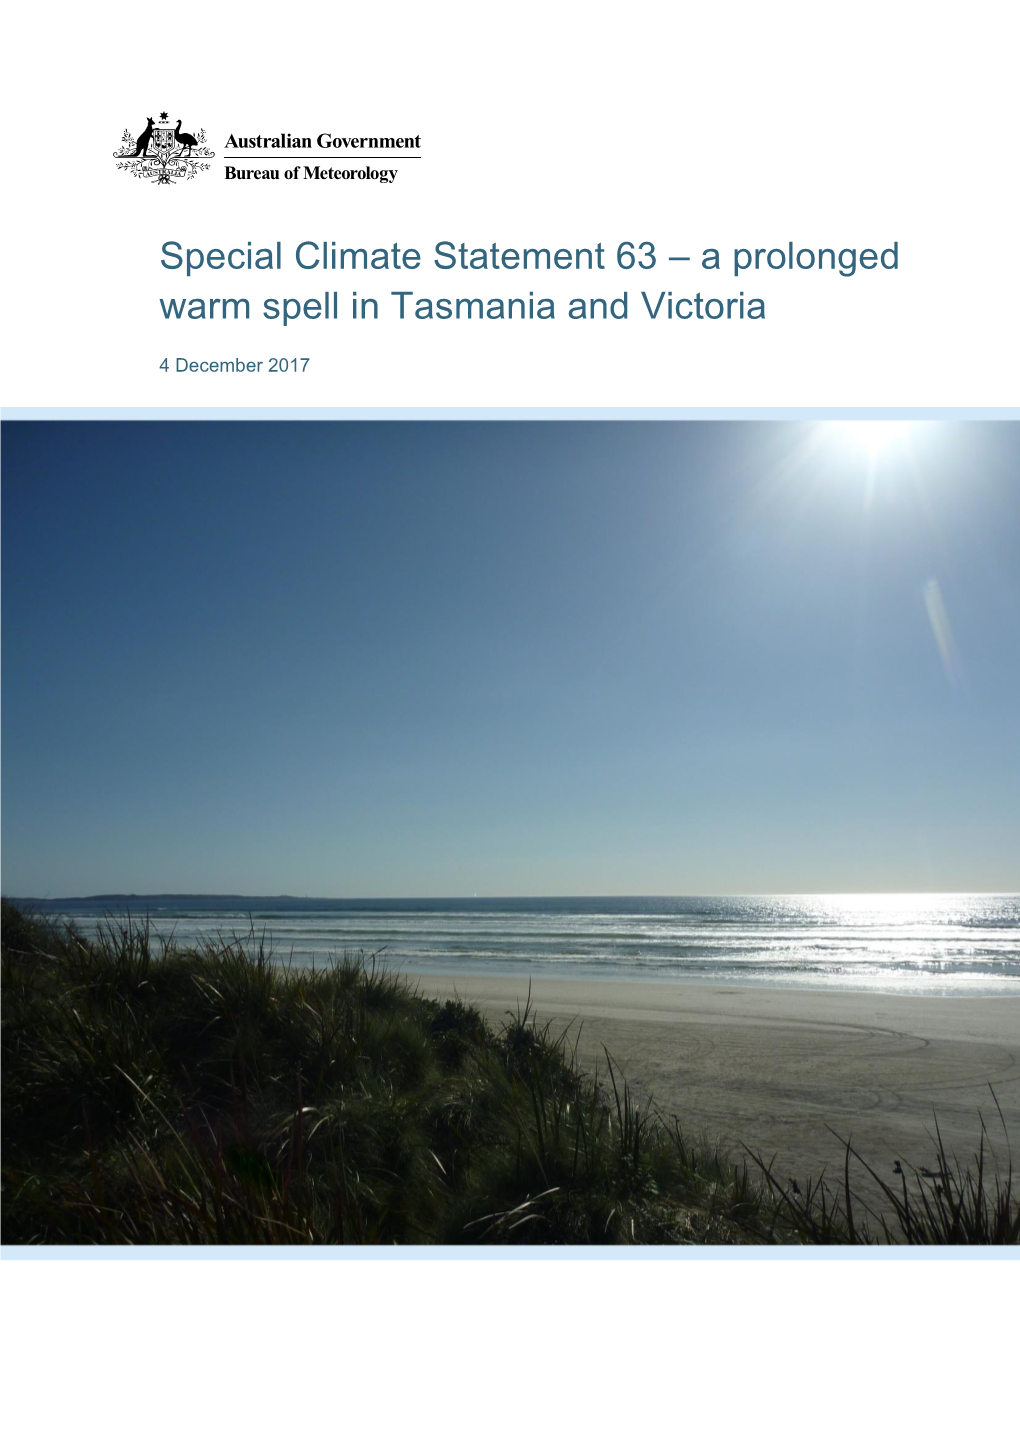 Statement 63—A Prolonged Warm Spell in Tasmania and Victoria